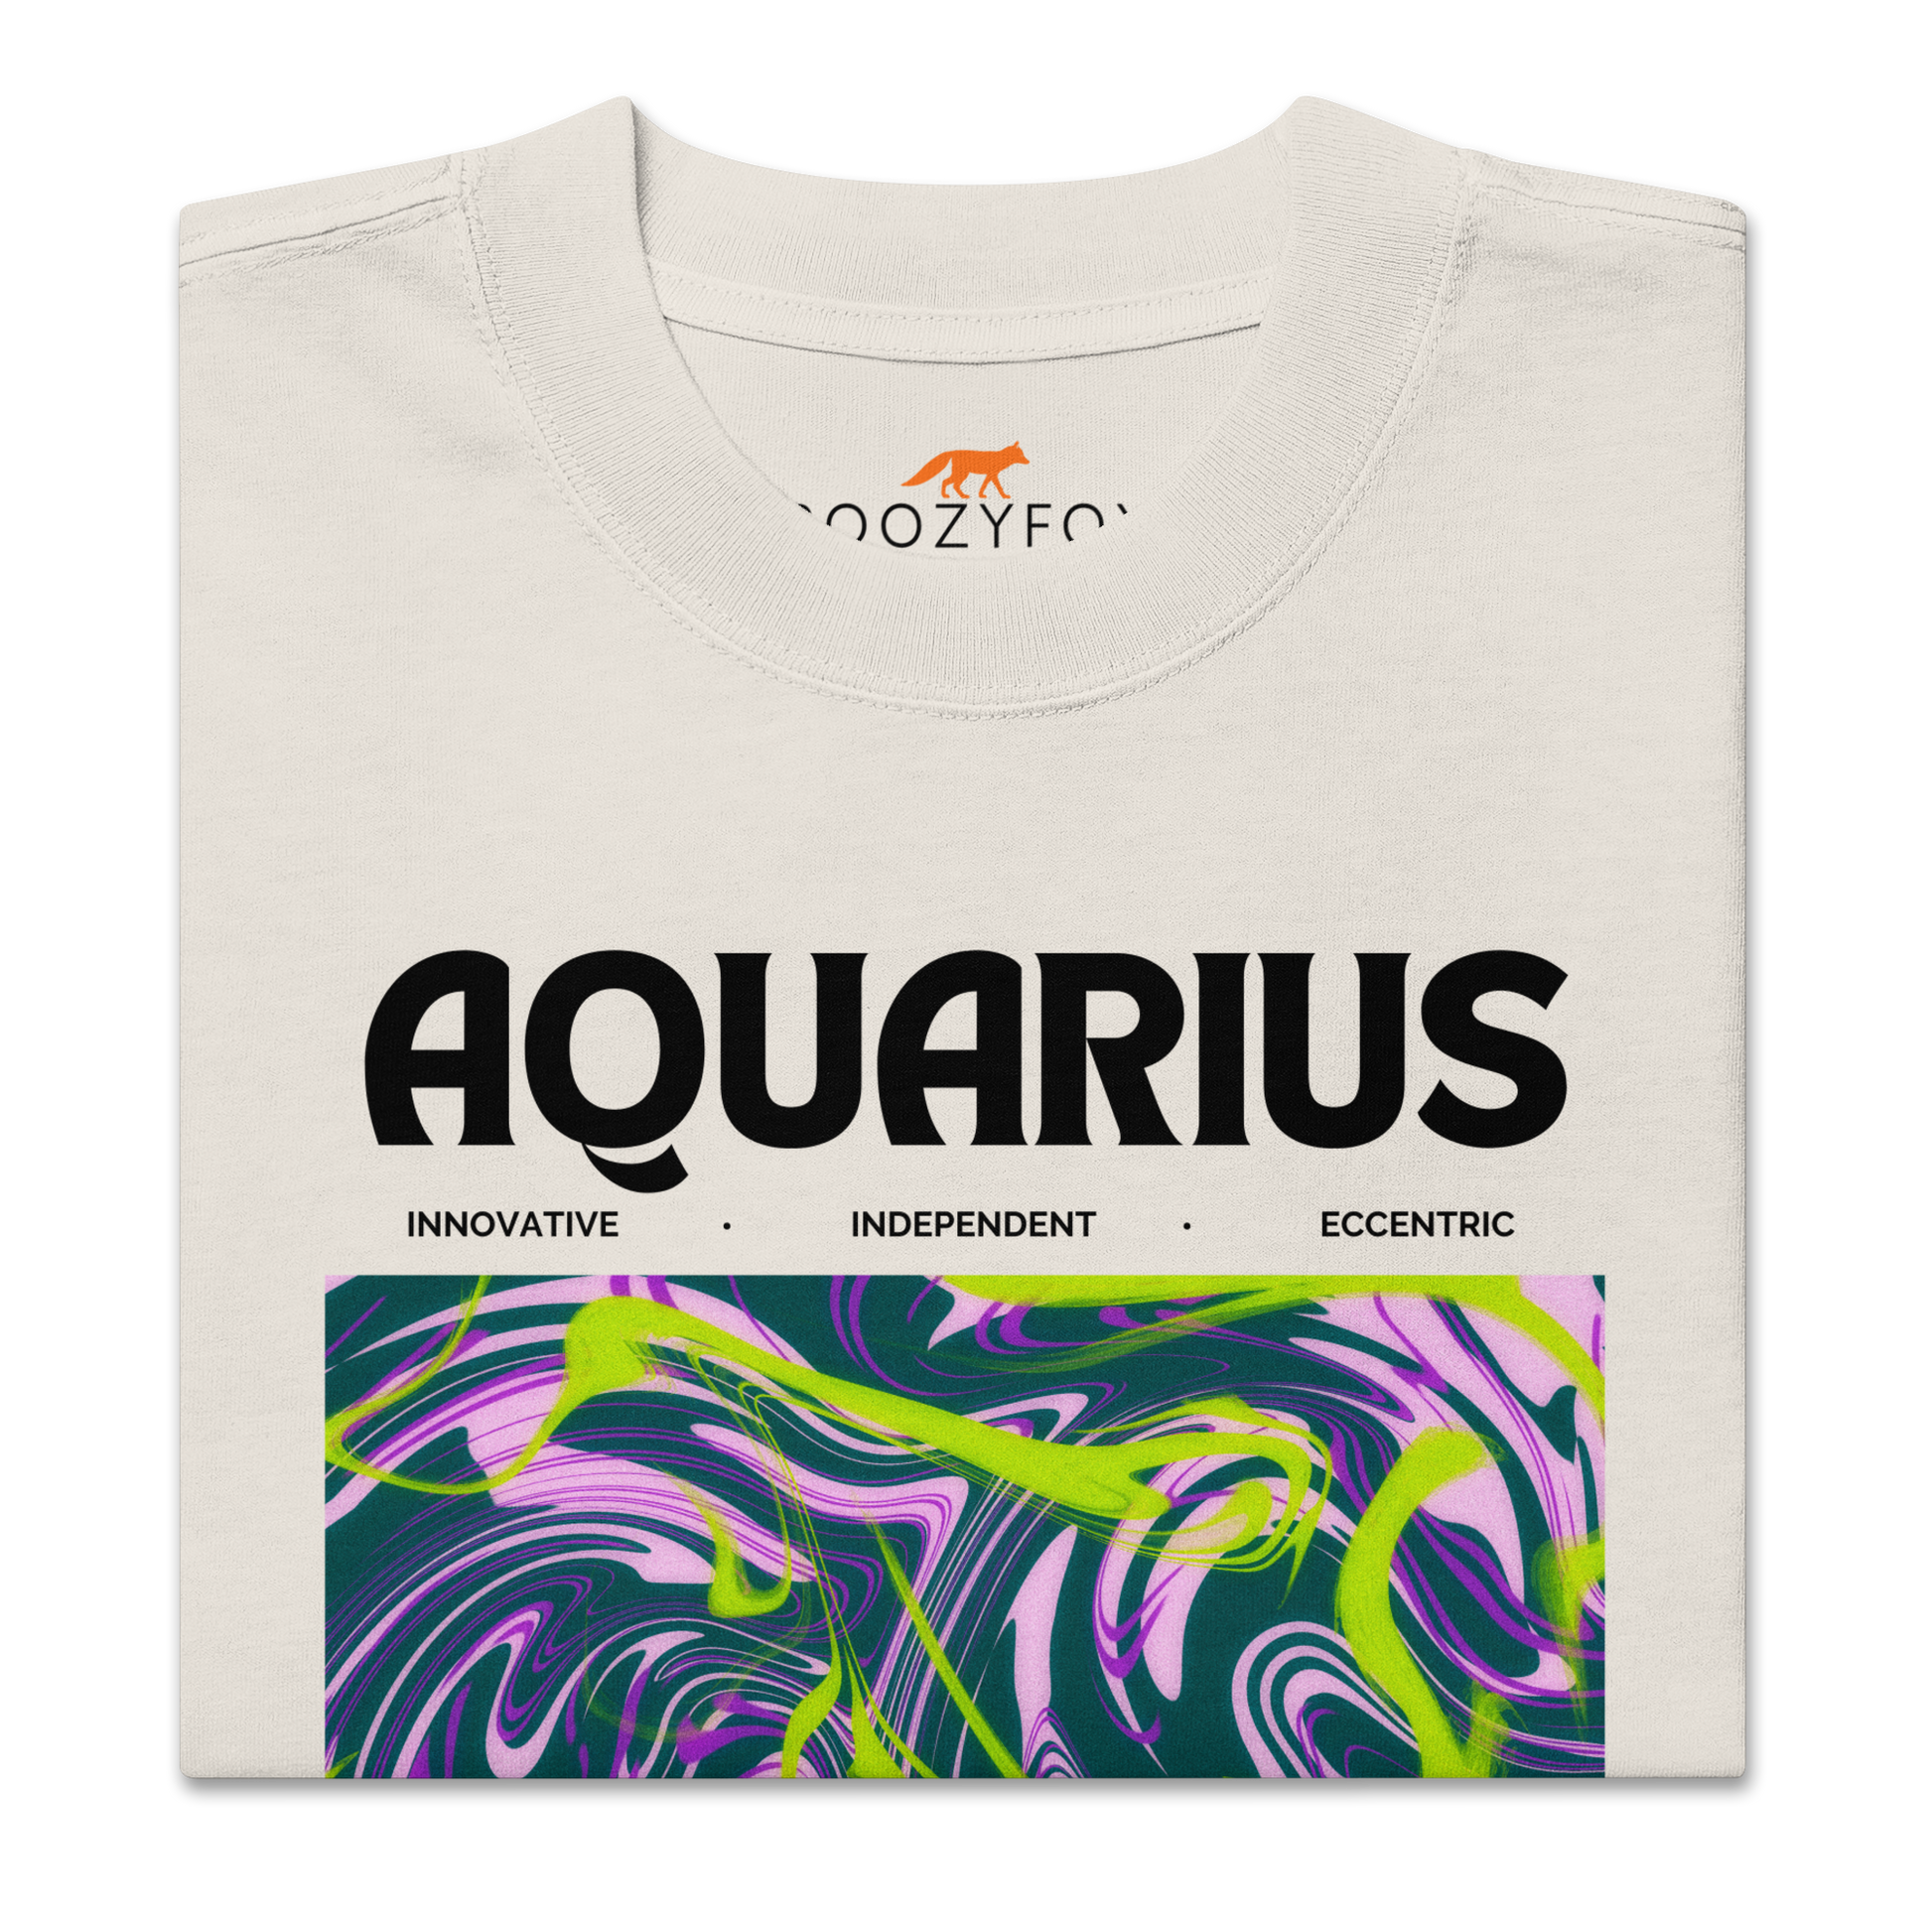 Front details of a Faded Bone Aquarius Oversized T-Shirt featuring an Abstract Aquarius Star Sign graphic on the chest - Cool Graphic Zodiac Oversized Tees - Boozy Fox